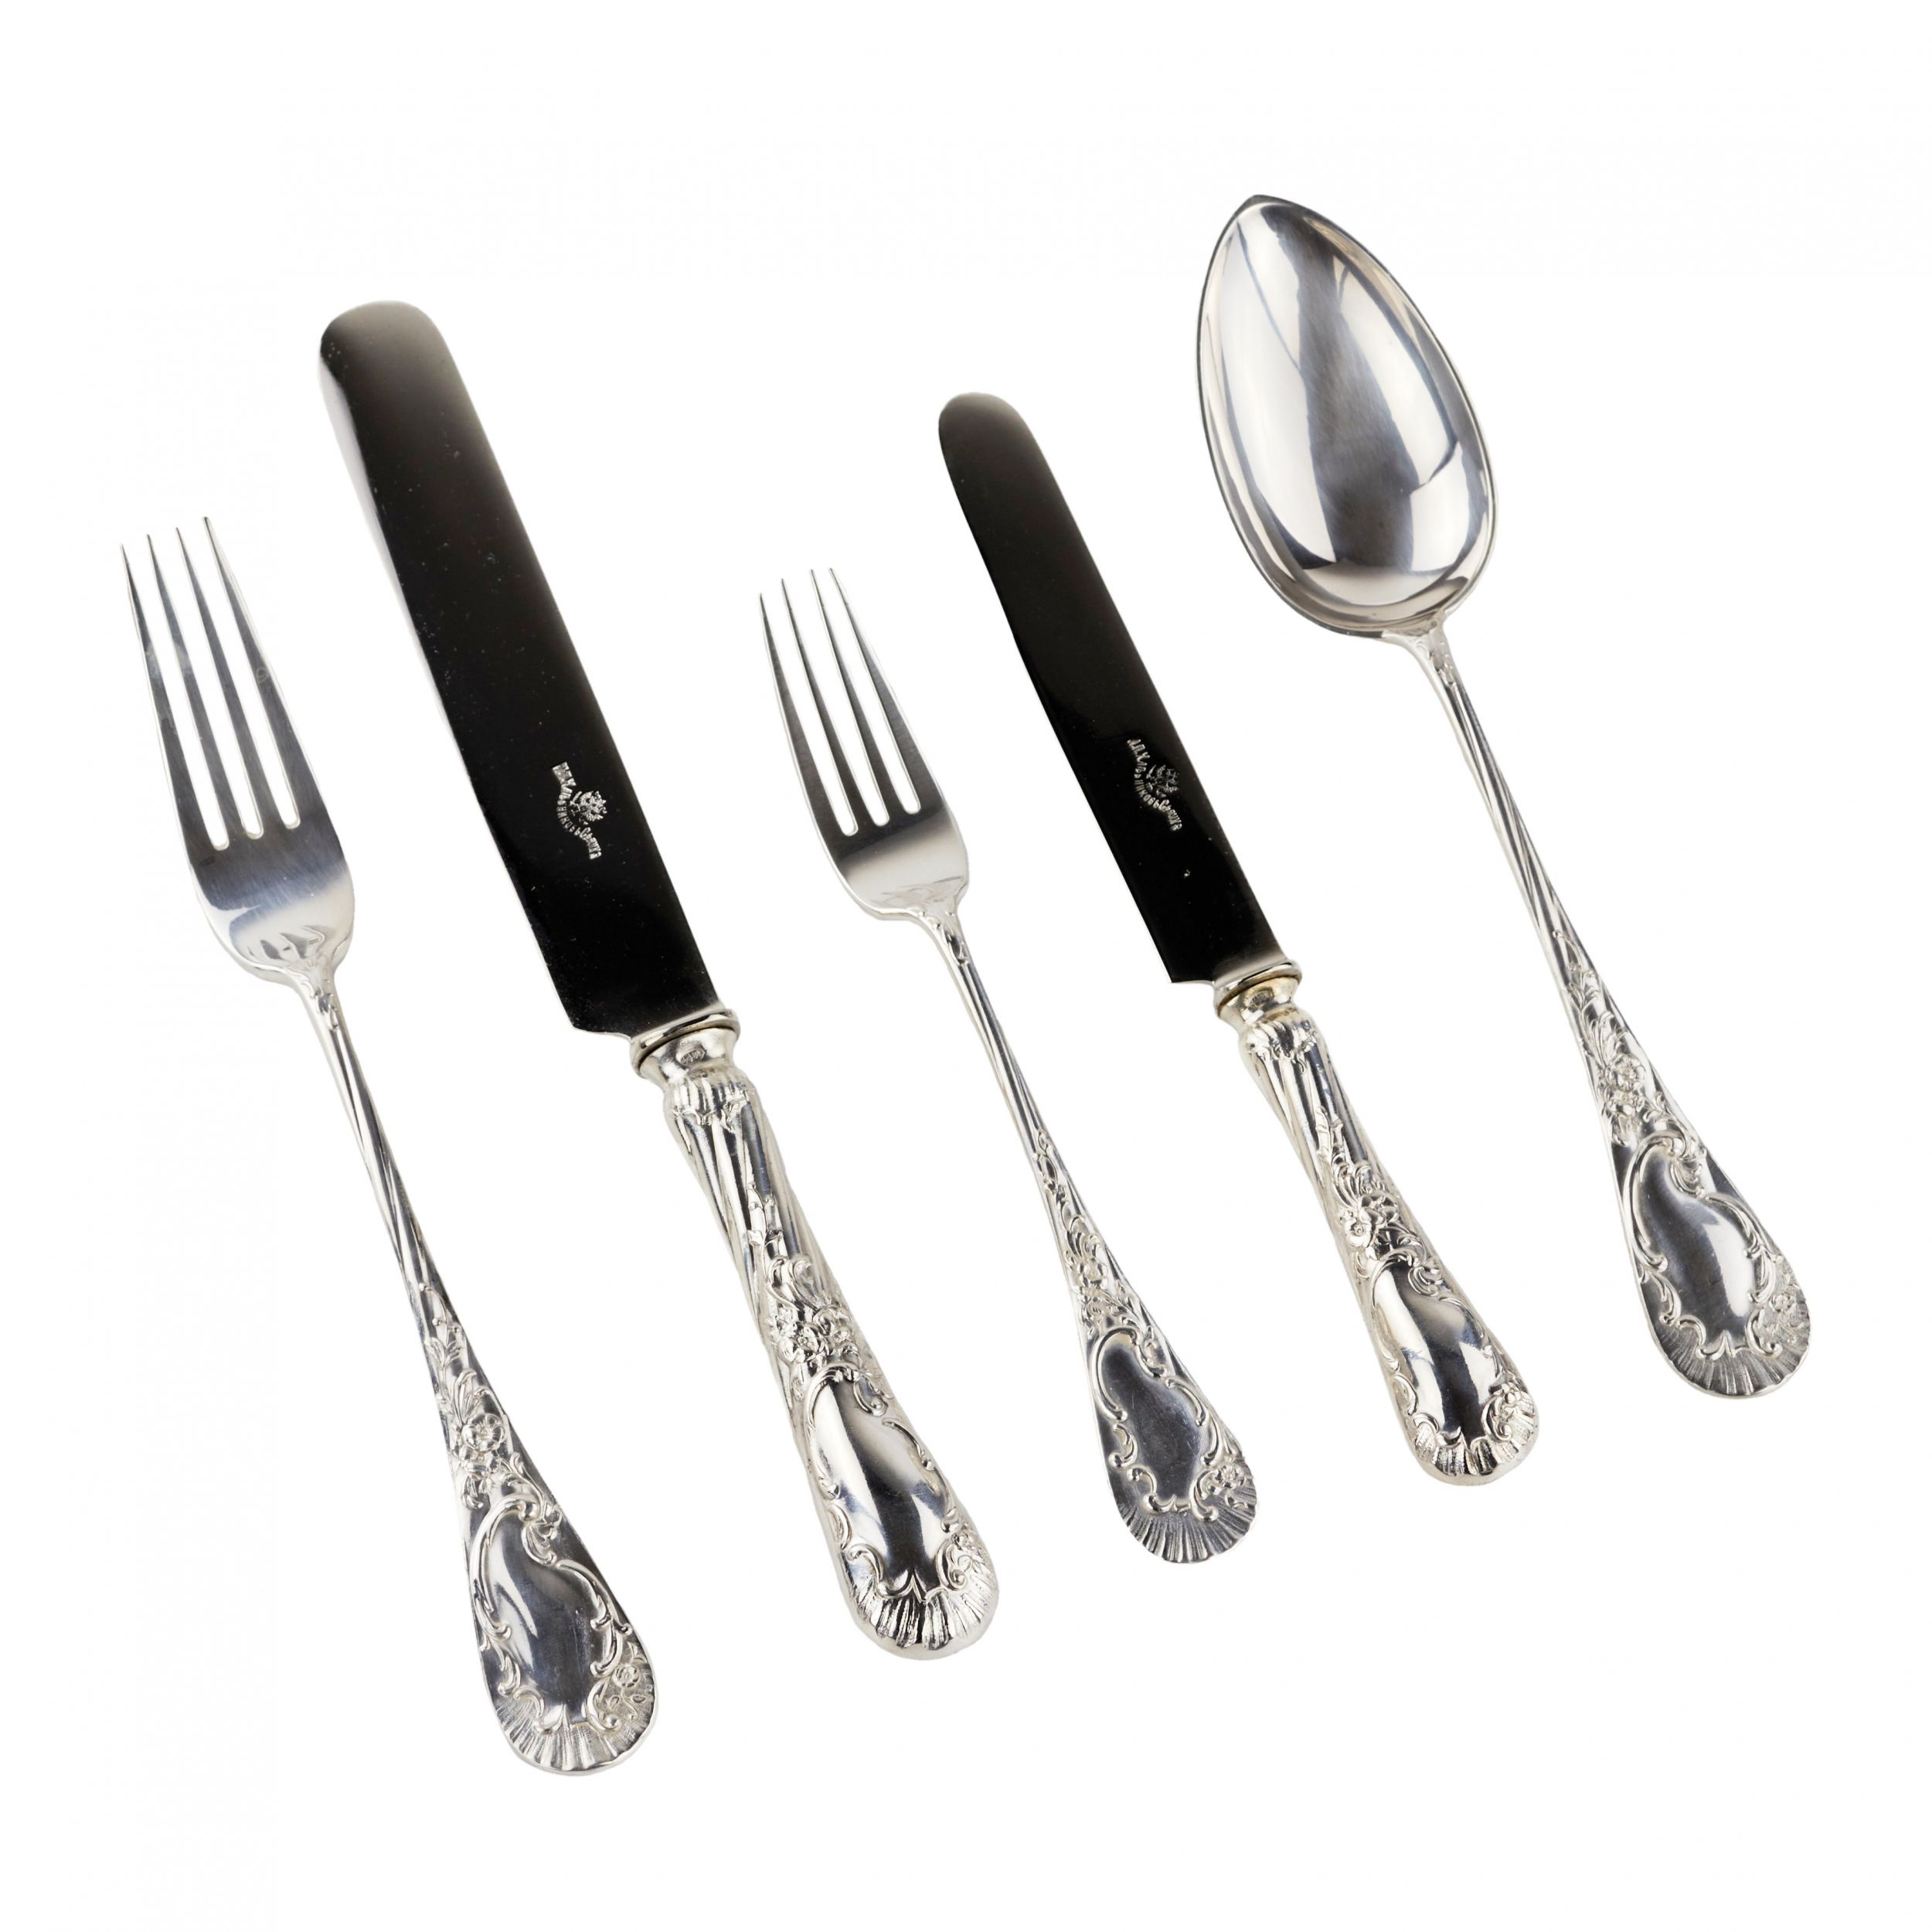 Silverware set for 6 persons. Ivan Khlebnikov. - Image 2 of 16